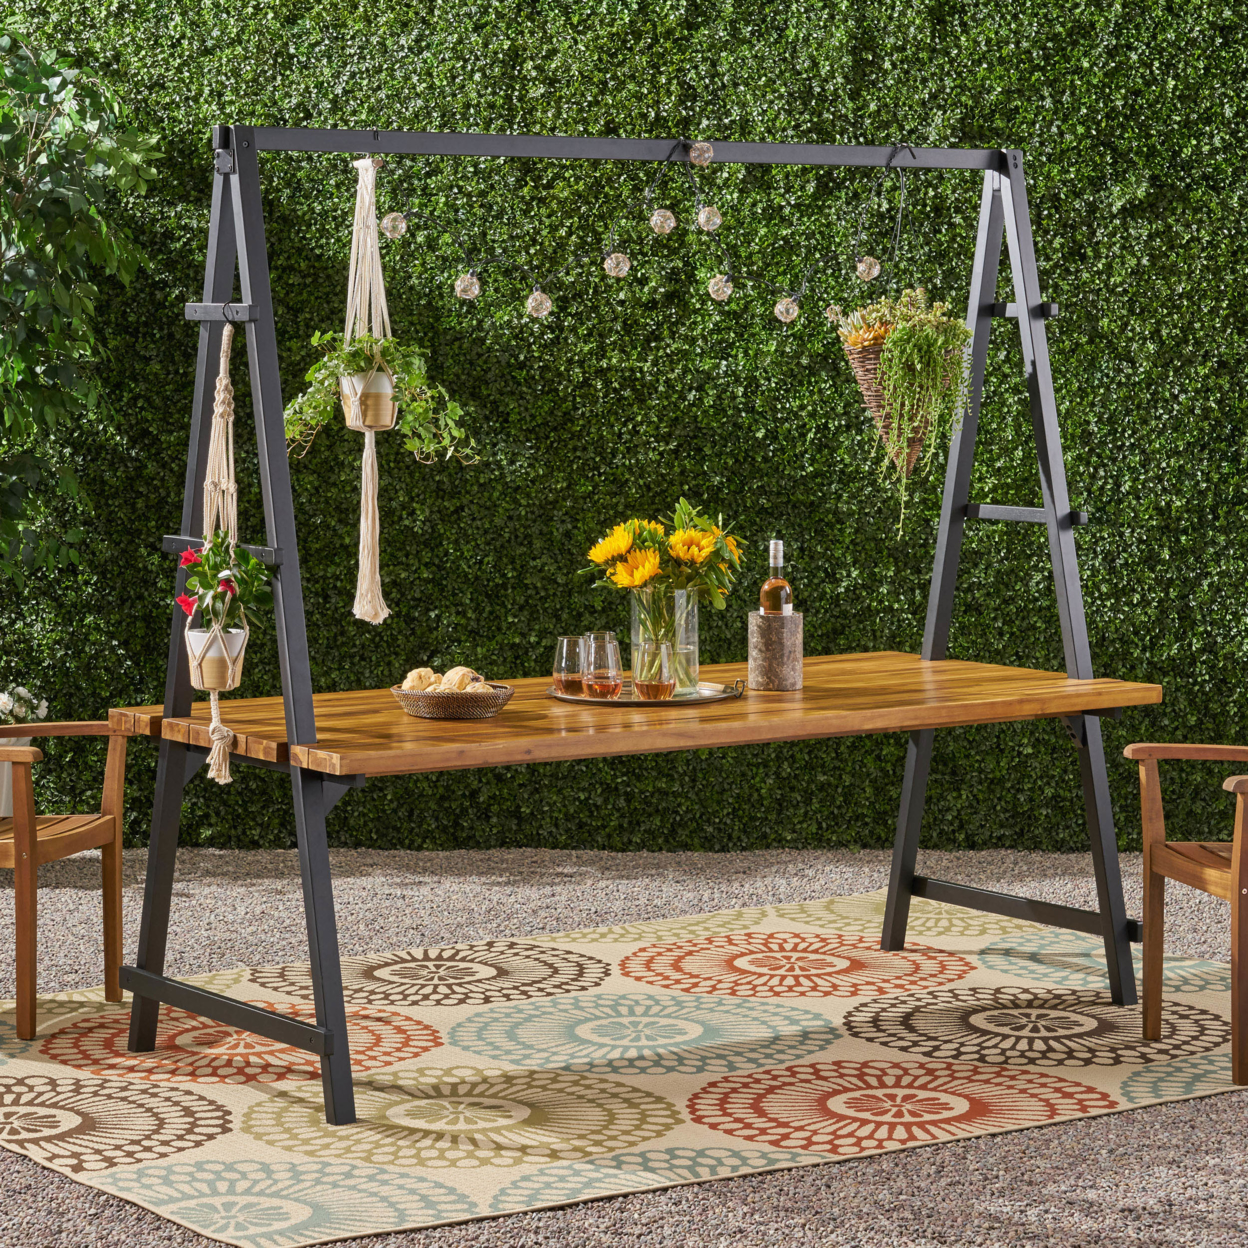 Chloe Outdoor Acacia Wood 88.5 Dining Table With Iron Plant Hanger - Dark Brown + White